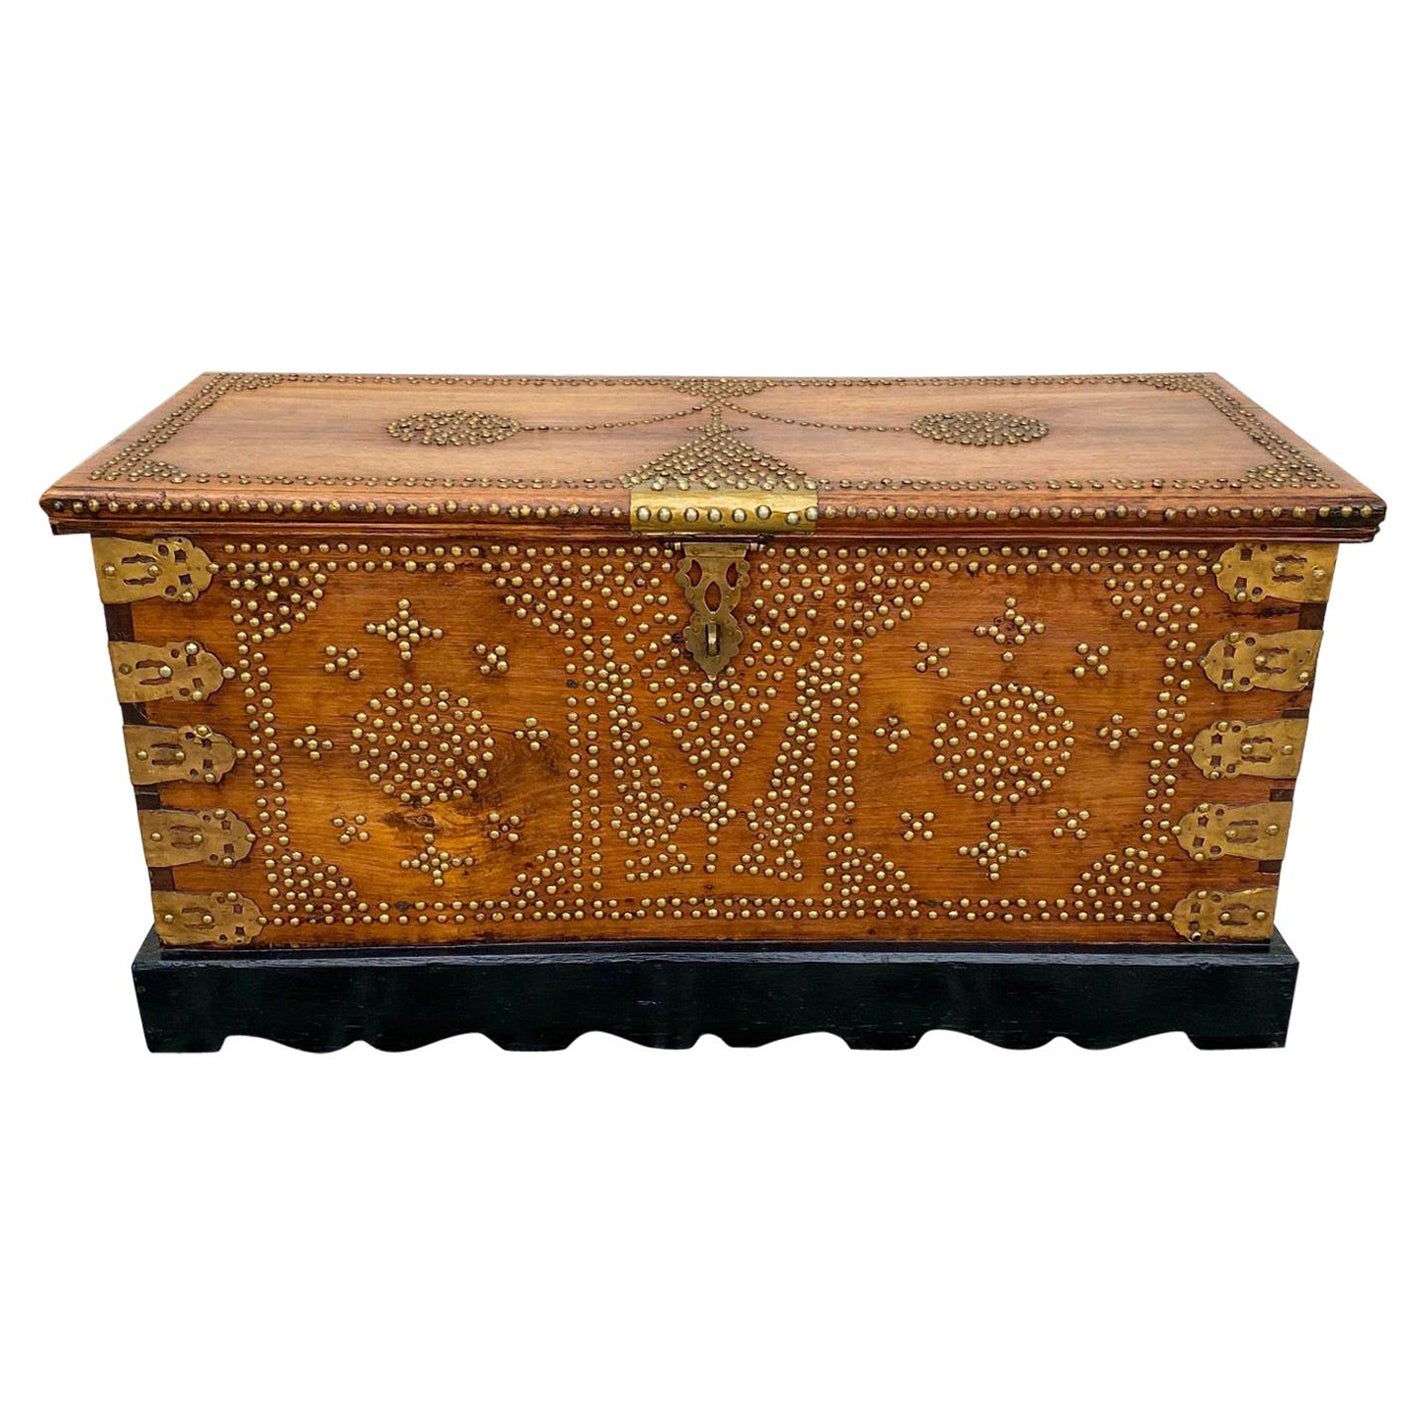 Antique Zanzibar Chest in Teak Wood with Brass Overlay and Studs For Sale